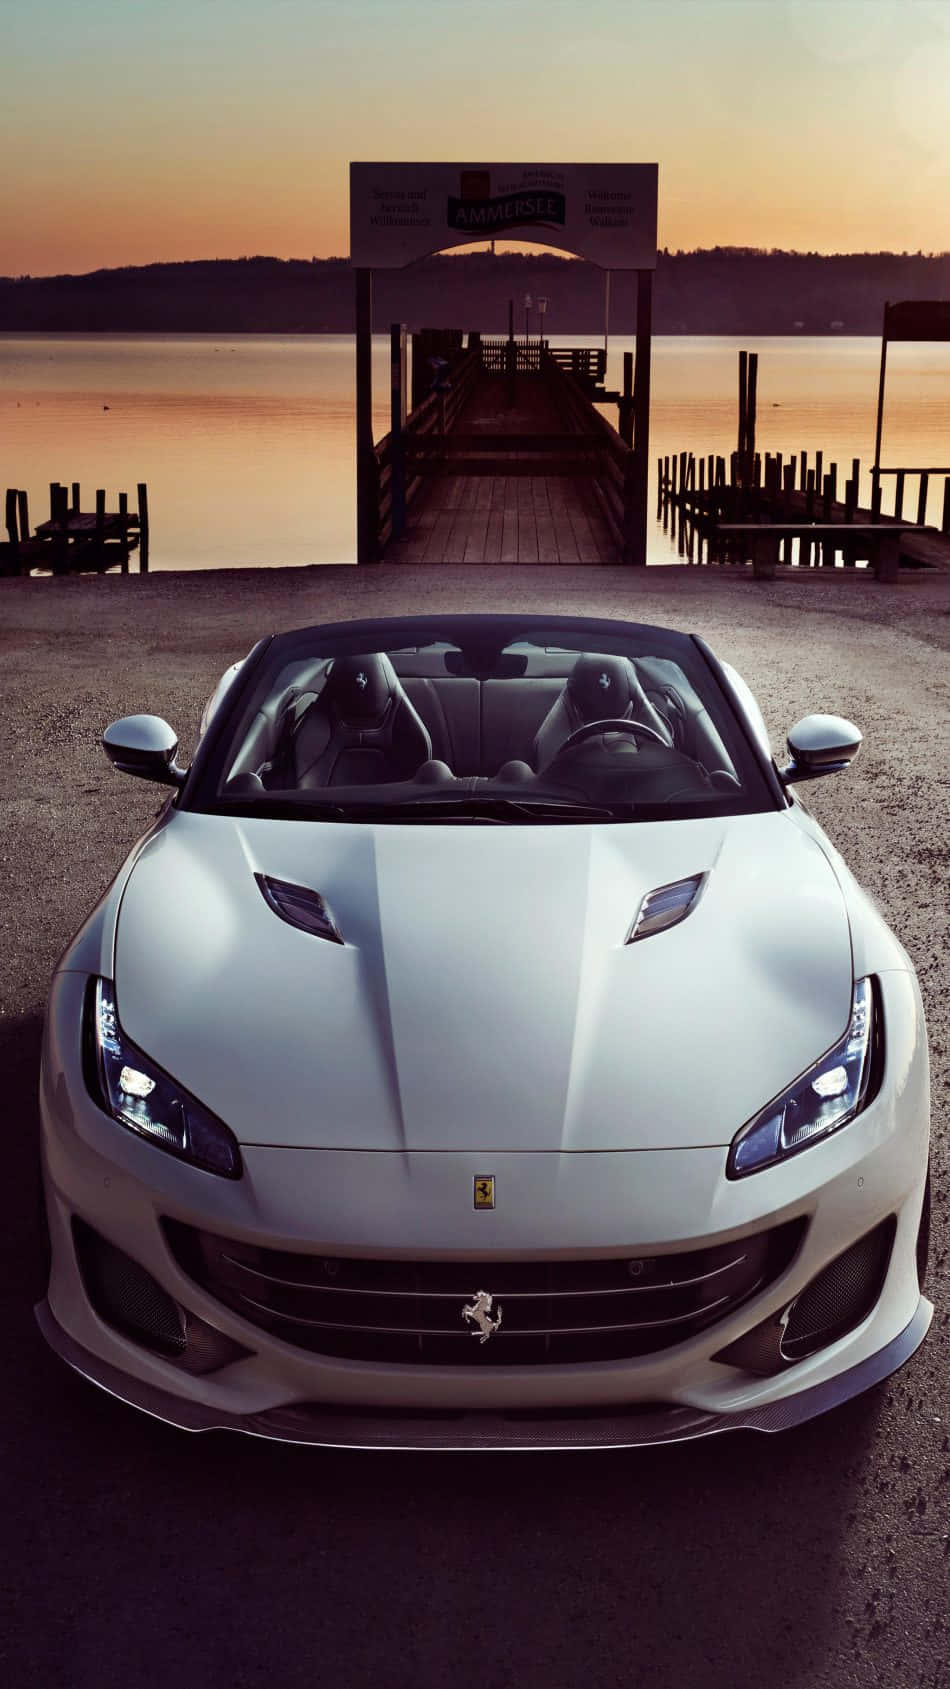 Get ready to set off on a thrilling ride with this sleek white Ferrari iPhone Wallpaper